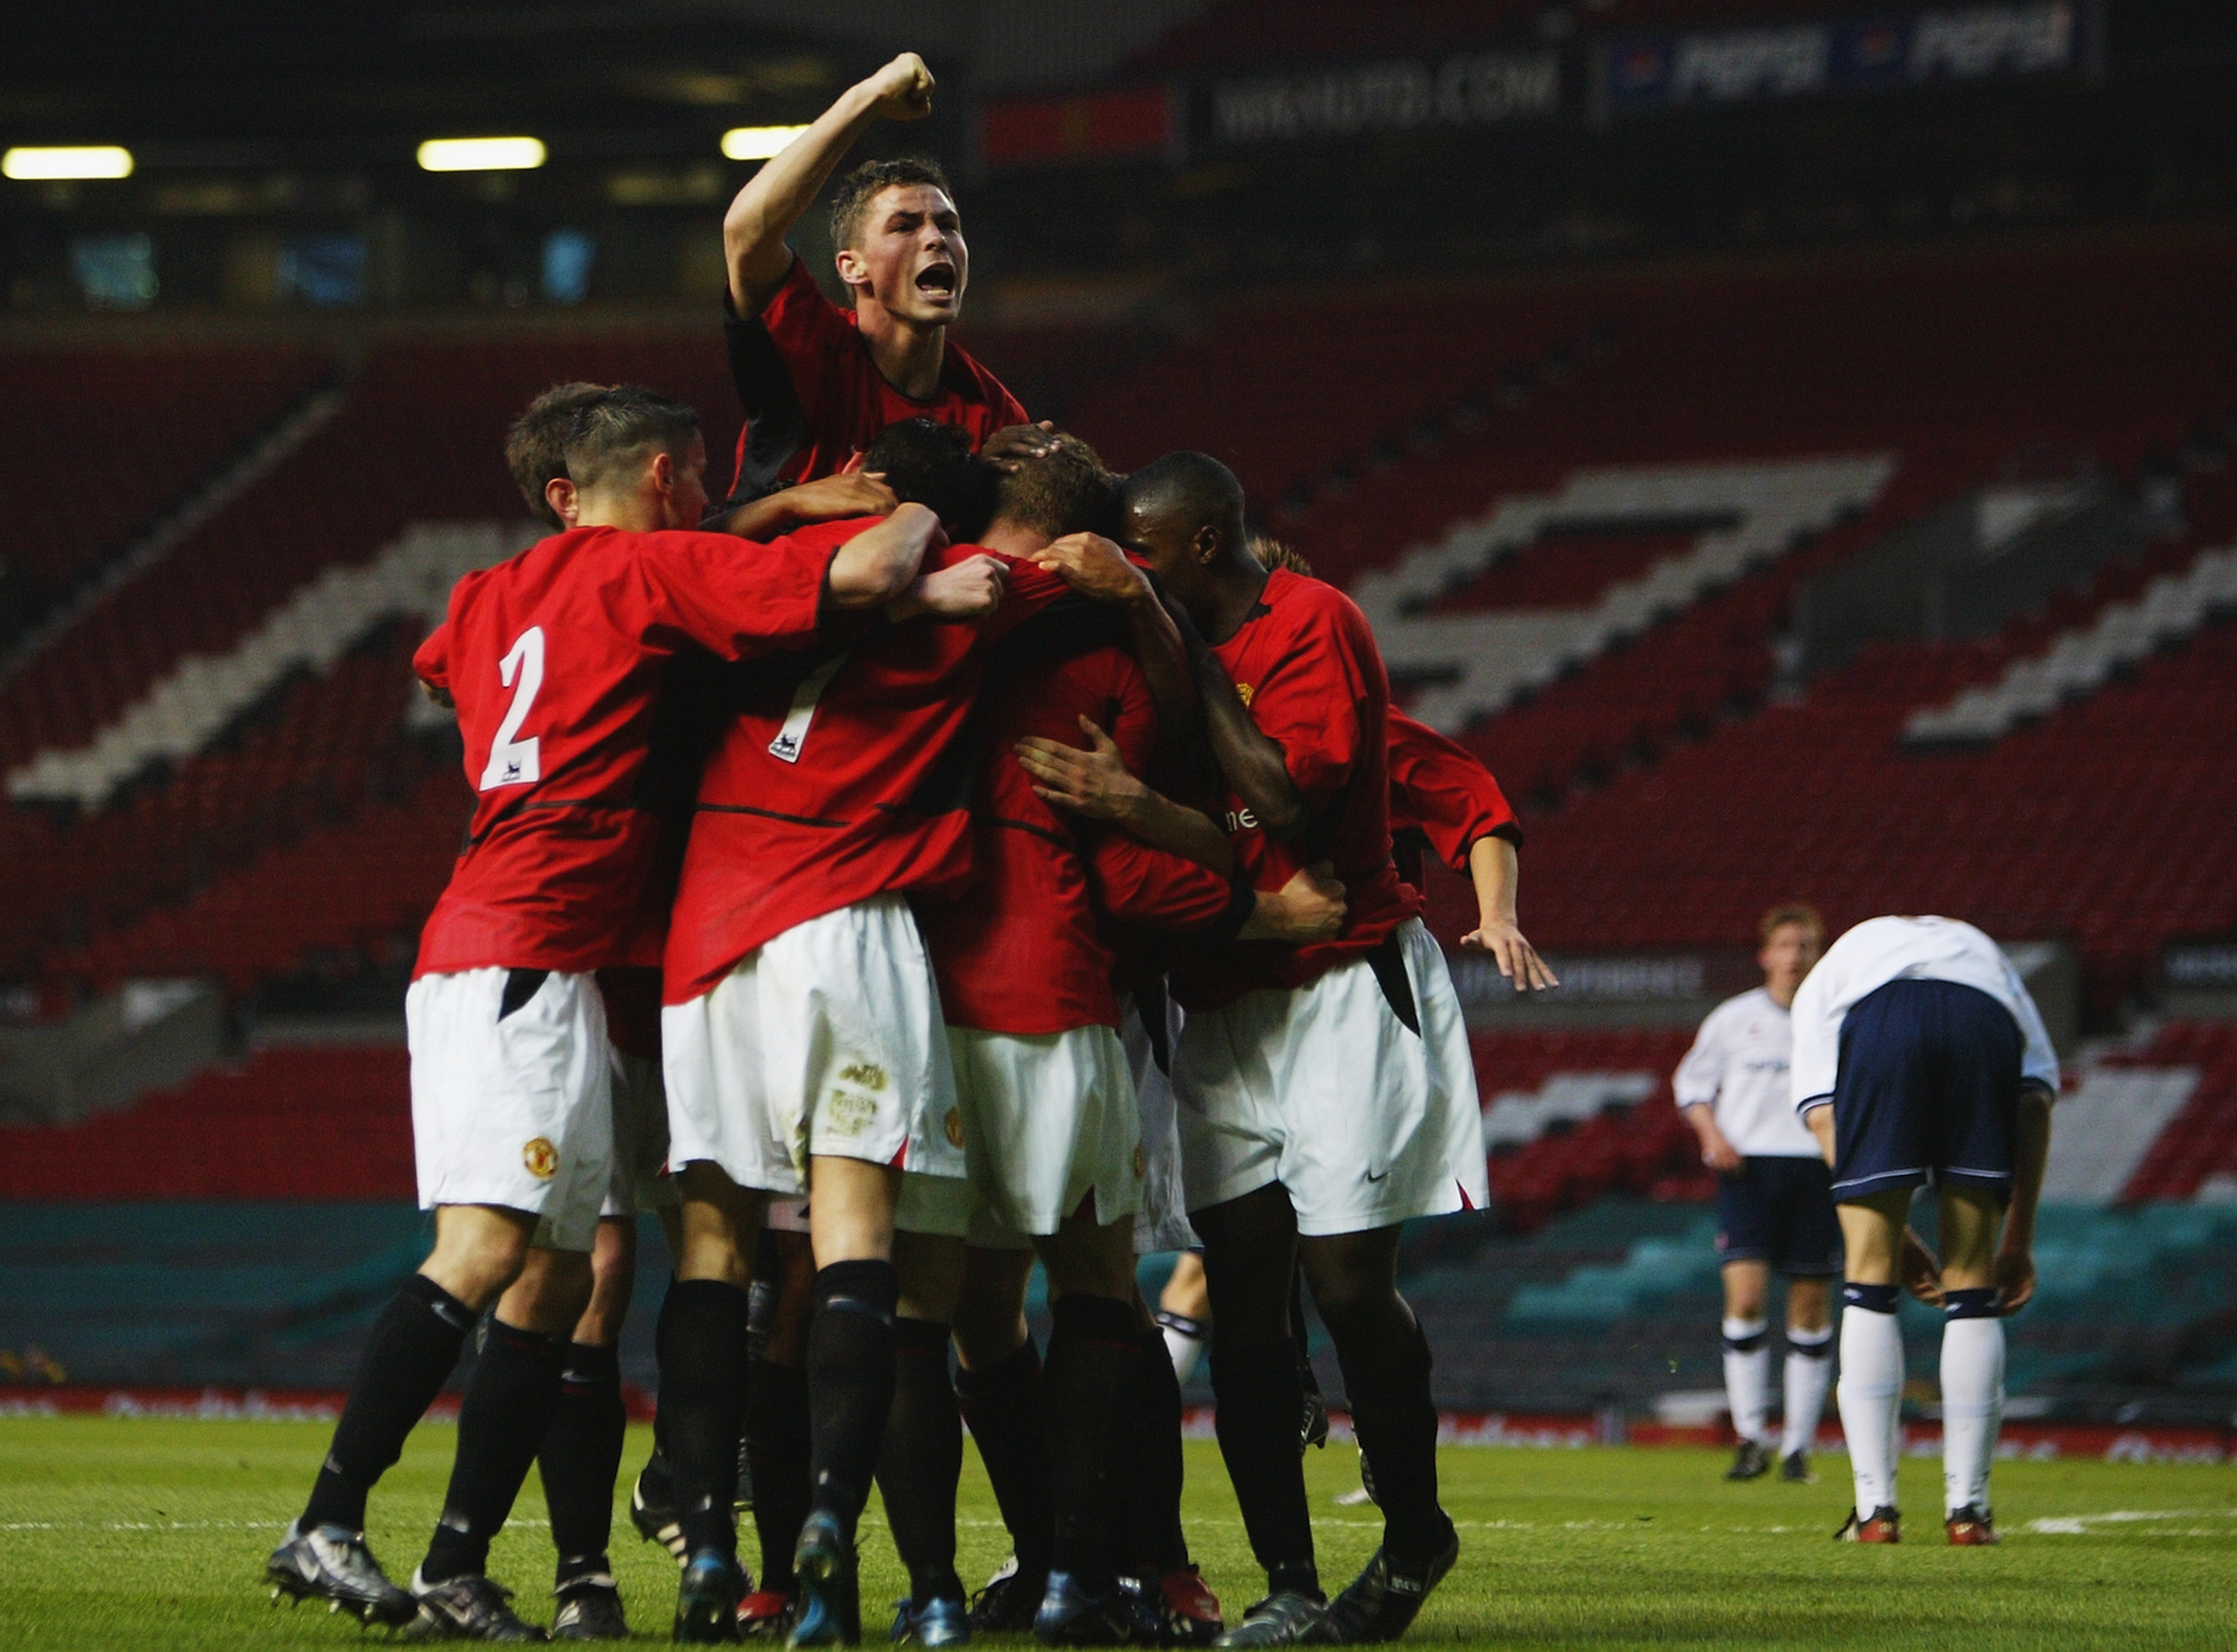 MANCHESTER - APRIL 25:  Manchester United youth players celebrate during the FA Youth Cup Final, second leg match between Manchester United and Middlesbrough on April 25, 2003 at Old Trafford in Manchester, England.  Manchester United won the final 3-1 on